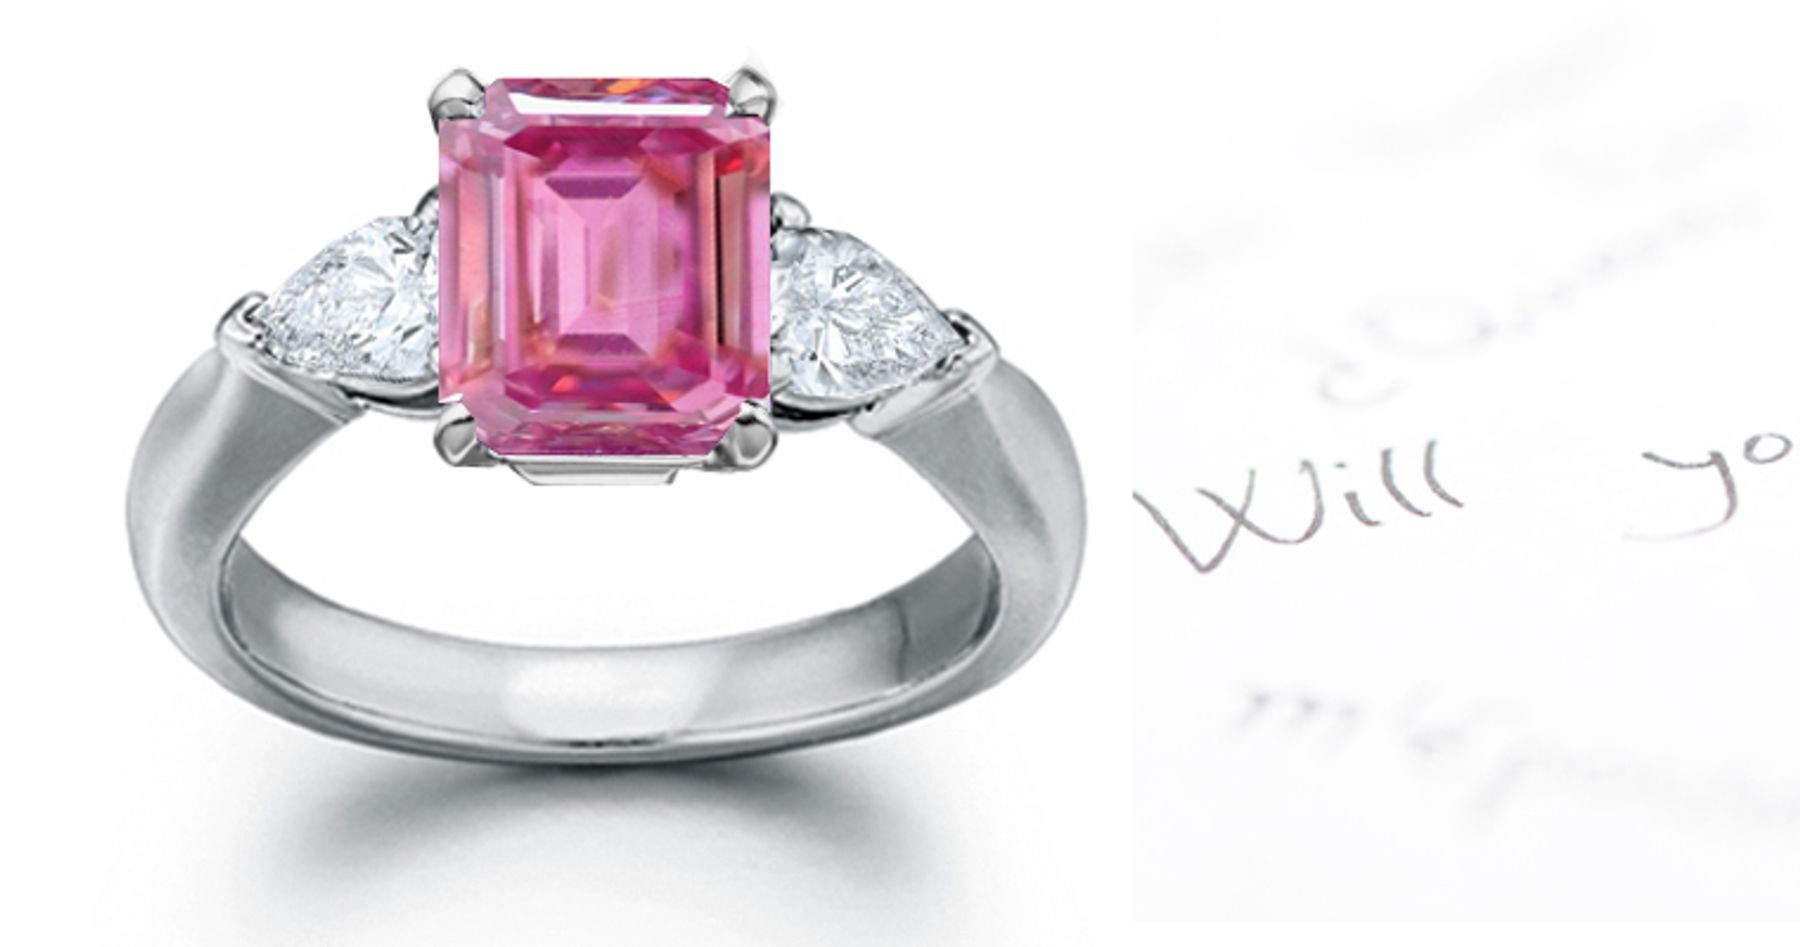 Fiesole Collection: 3 Stone Emerald Cut Pink Sapphire & Pears Diamond Ring